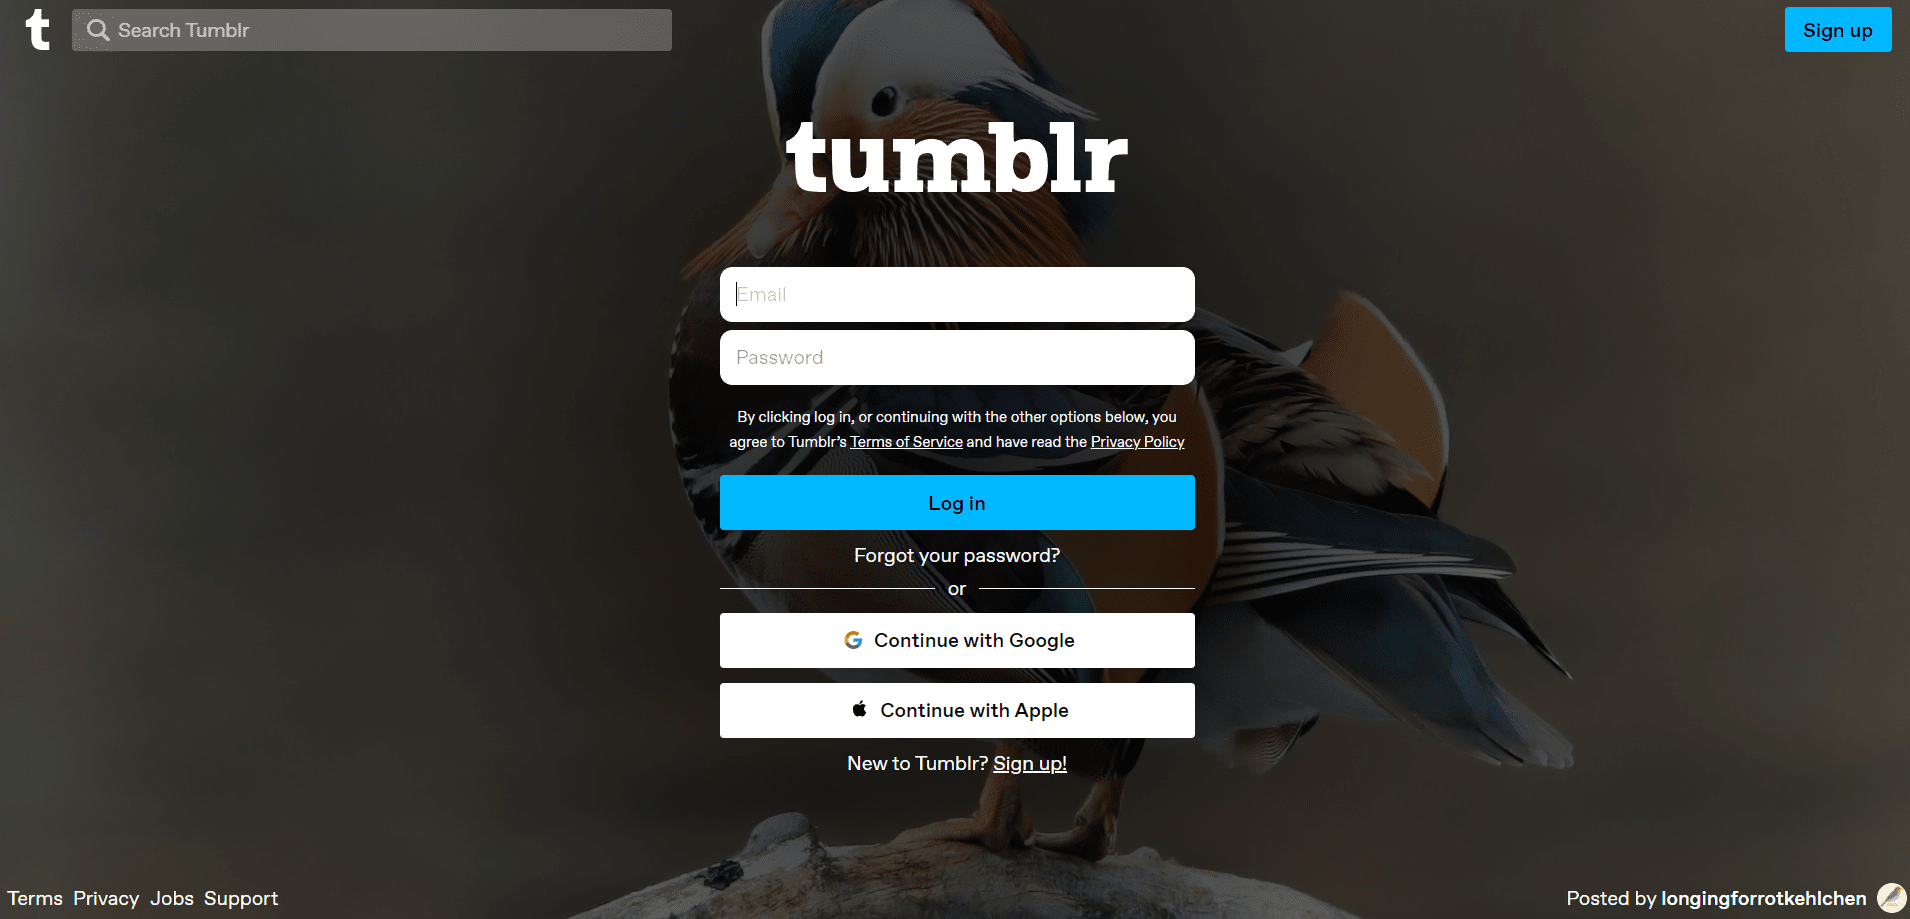 About Tumblr